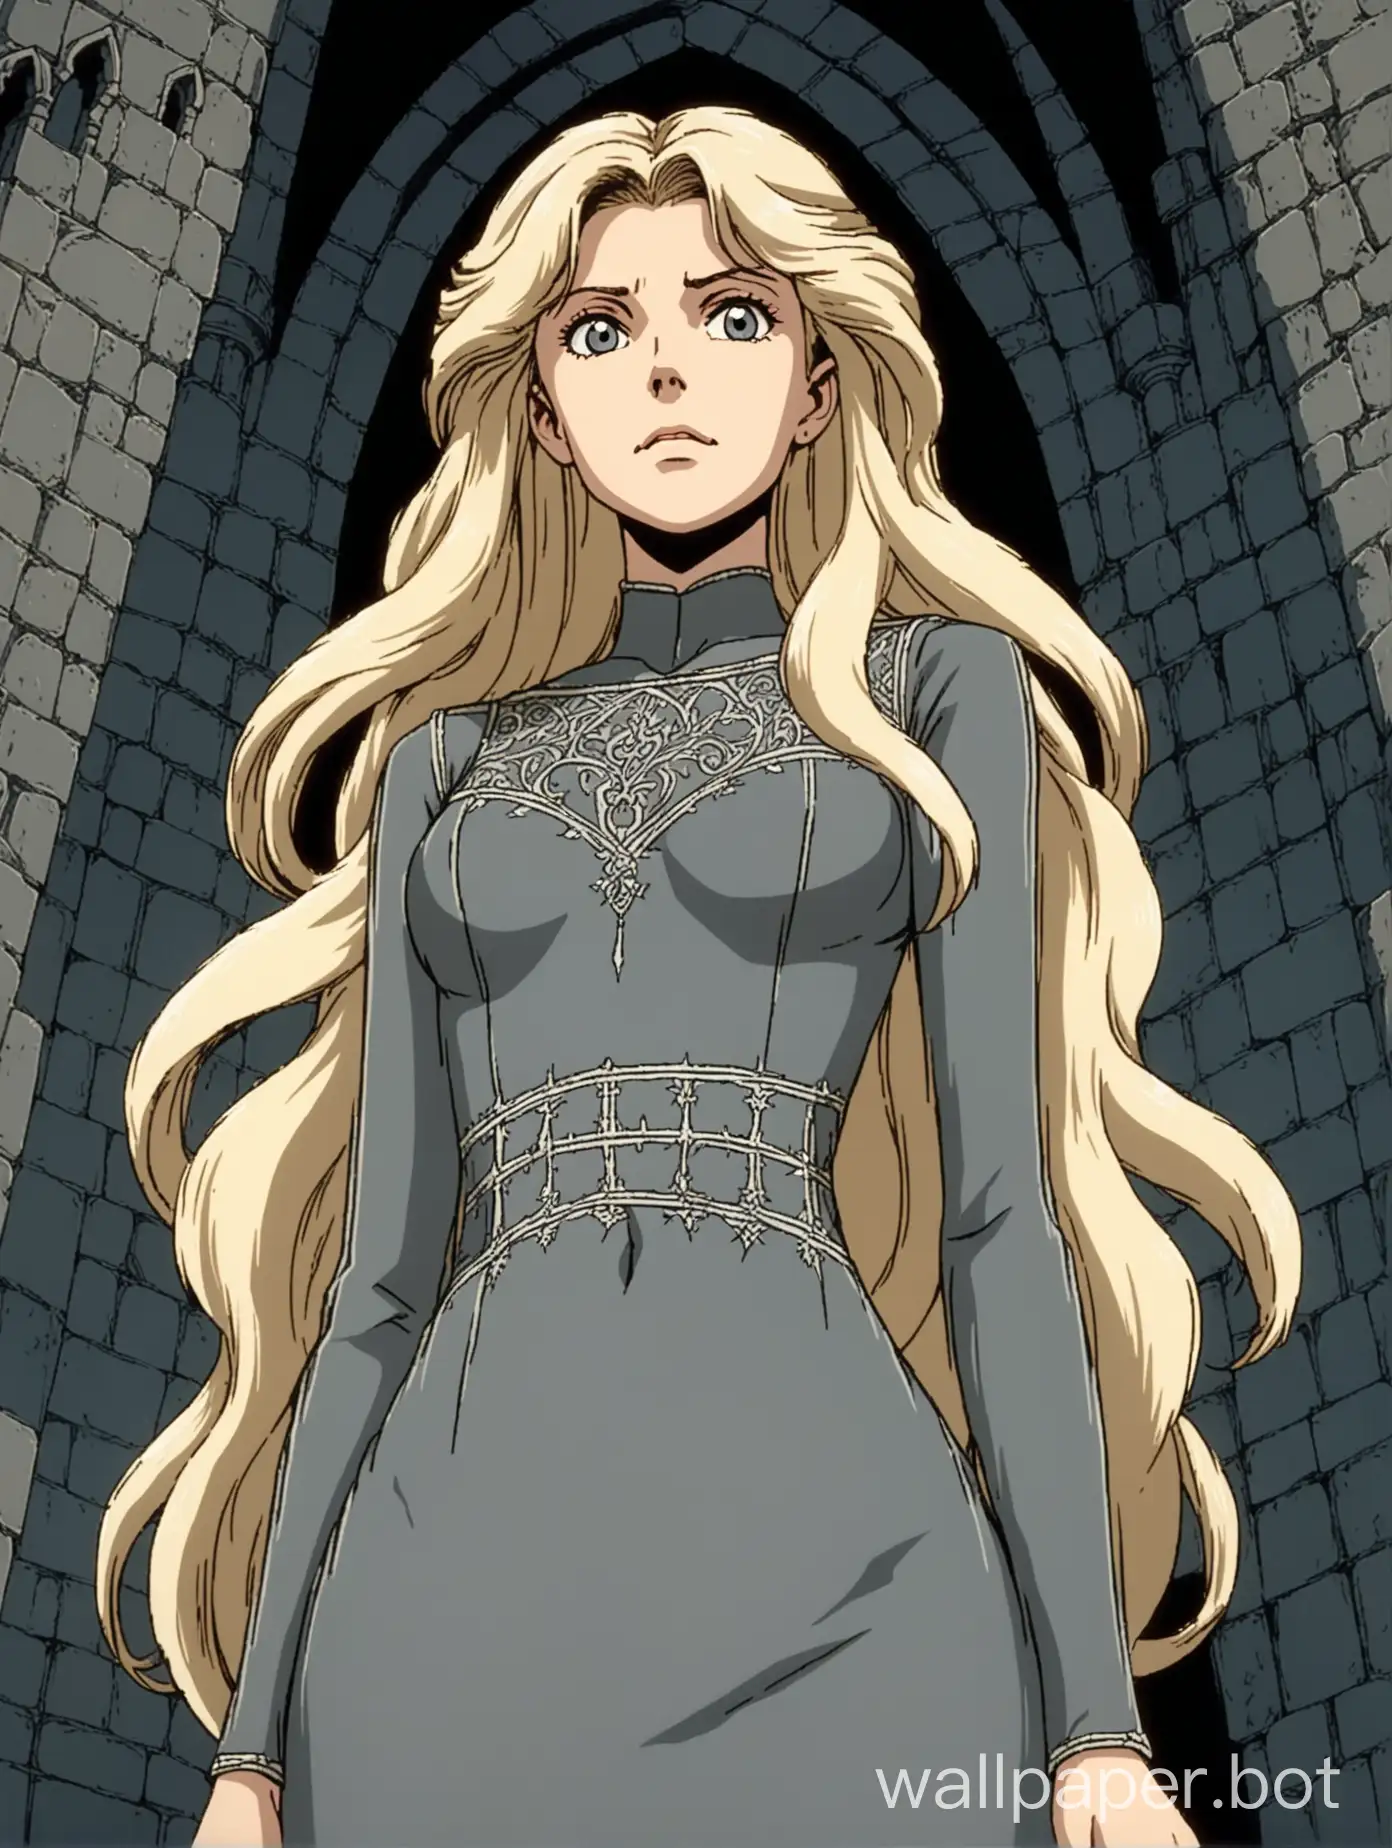 view from below, portrait of a young and attractive white woman, she has long wavy white-blonde hair, standing regally, elegant and slender, thin sharp face, kind and sullen expression, wearing a sheer thin dark grey skintight dress, decorative stitching, medieval elegance, 1980s retro anime, castle interior